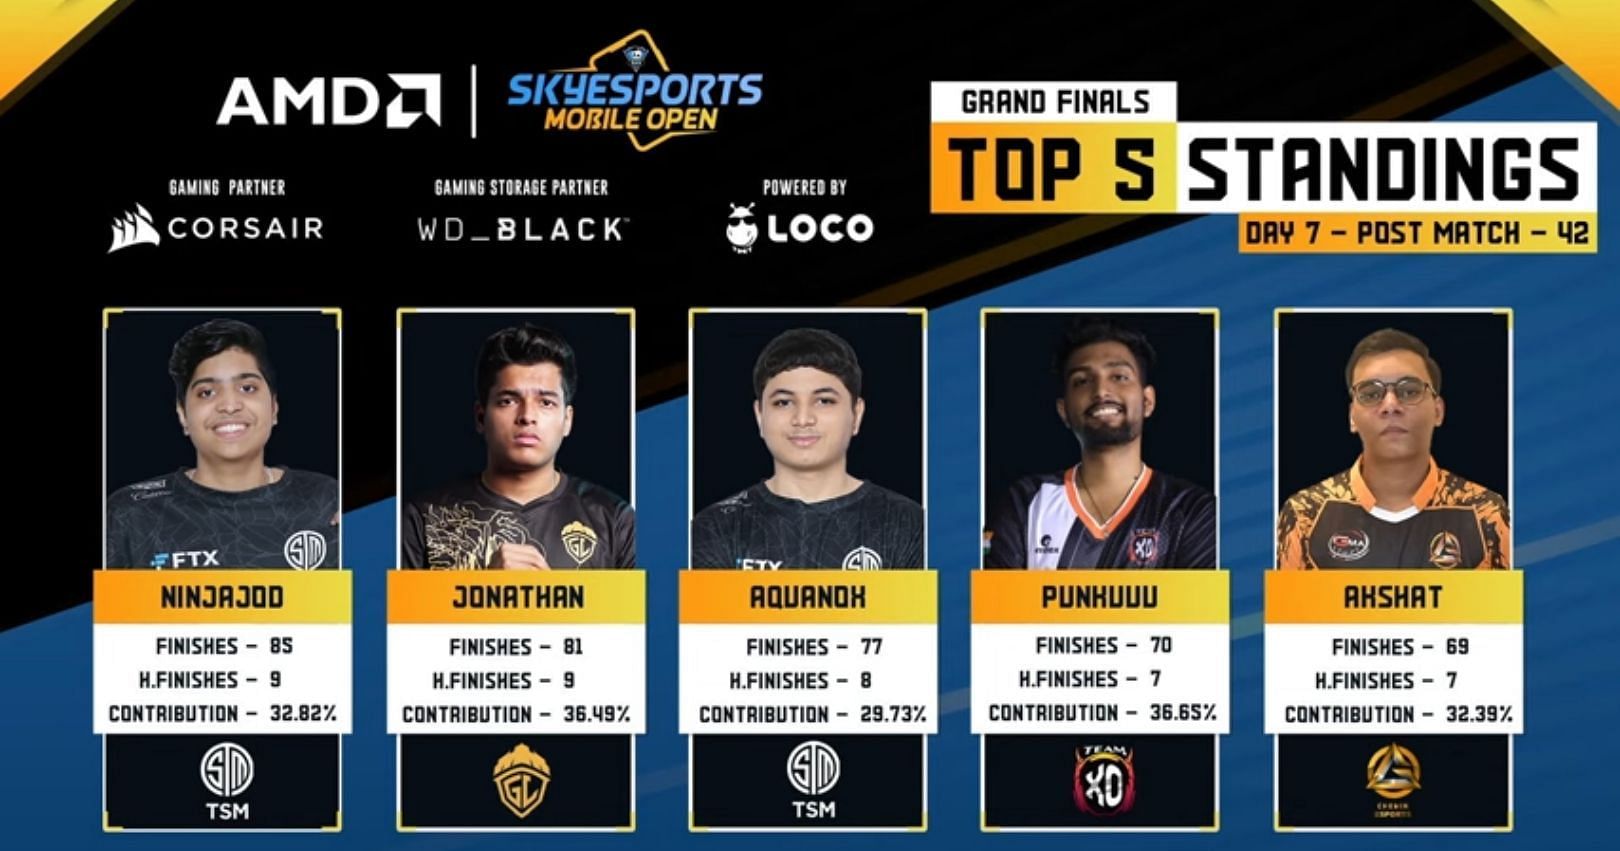 The top five players from the Skyesports Mobile Open BGMI Grand Finals (Image via Skyesports)